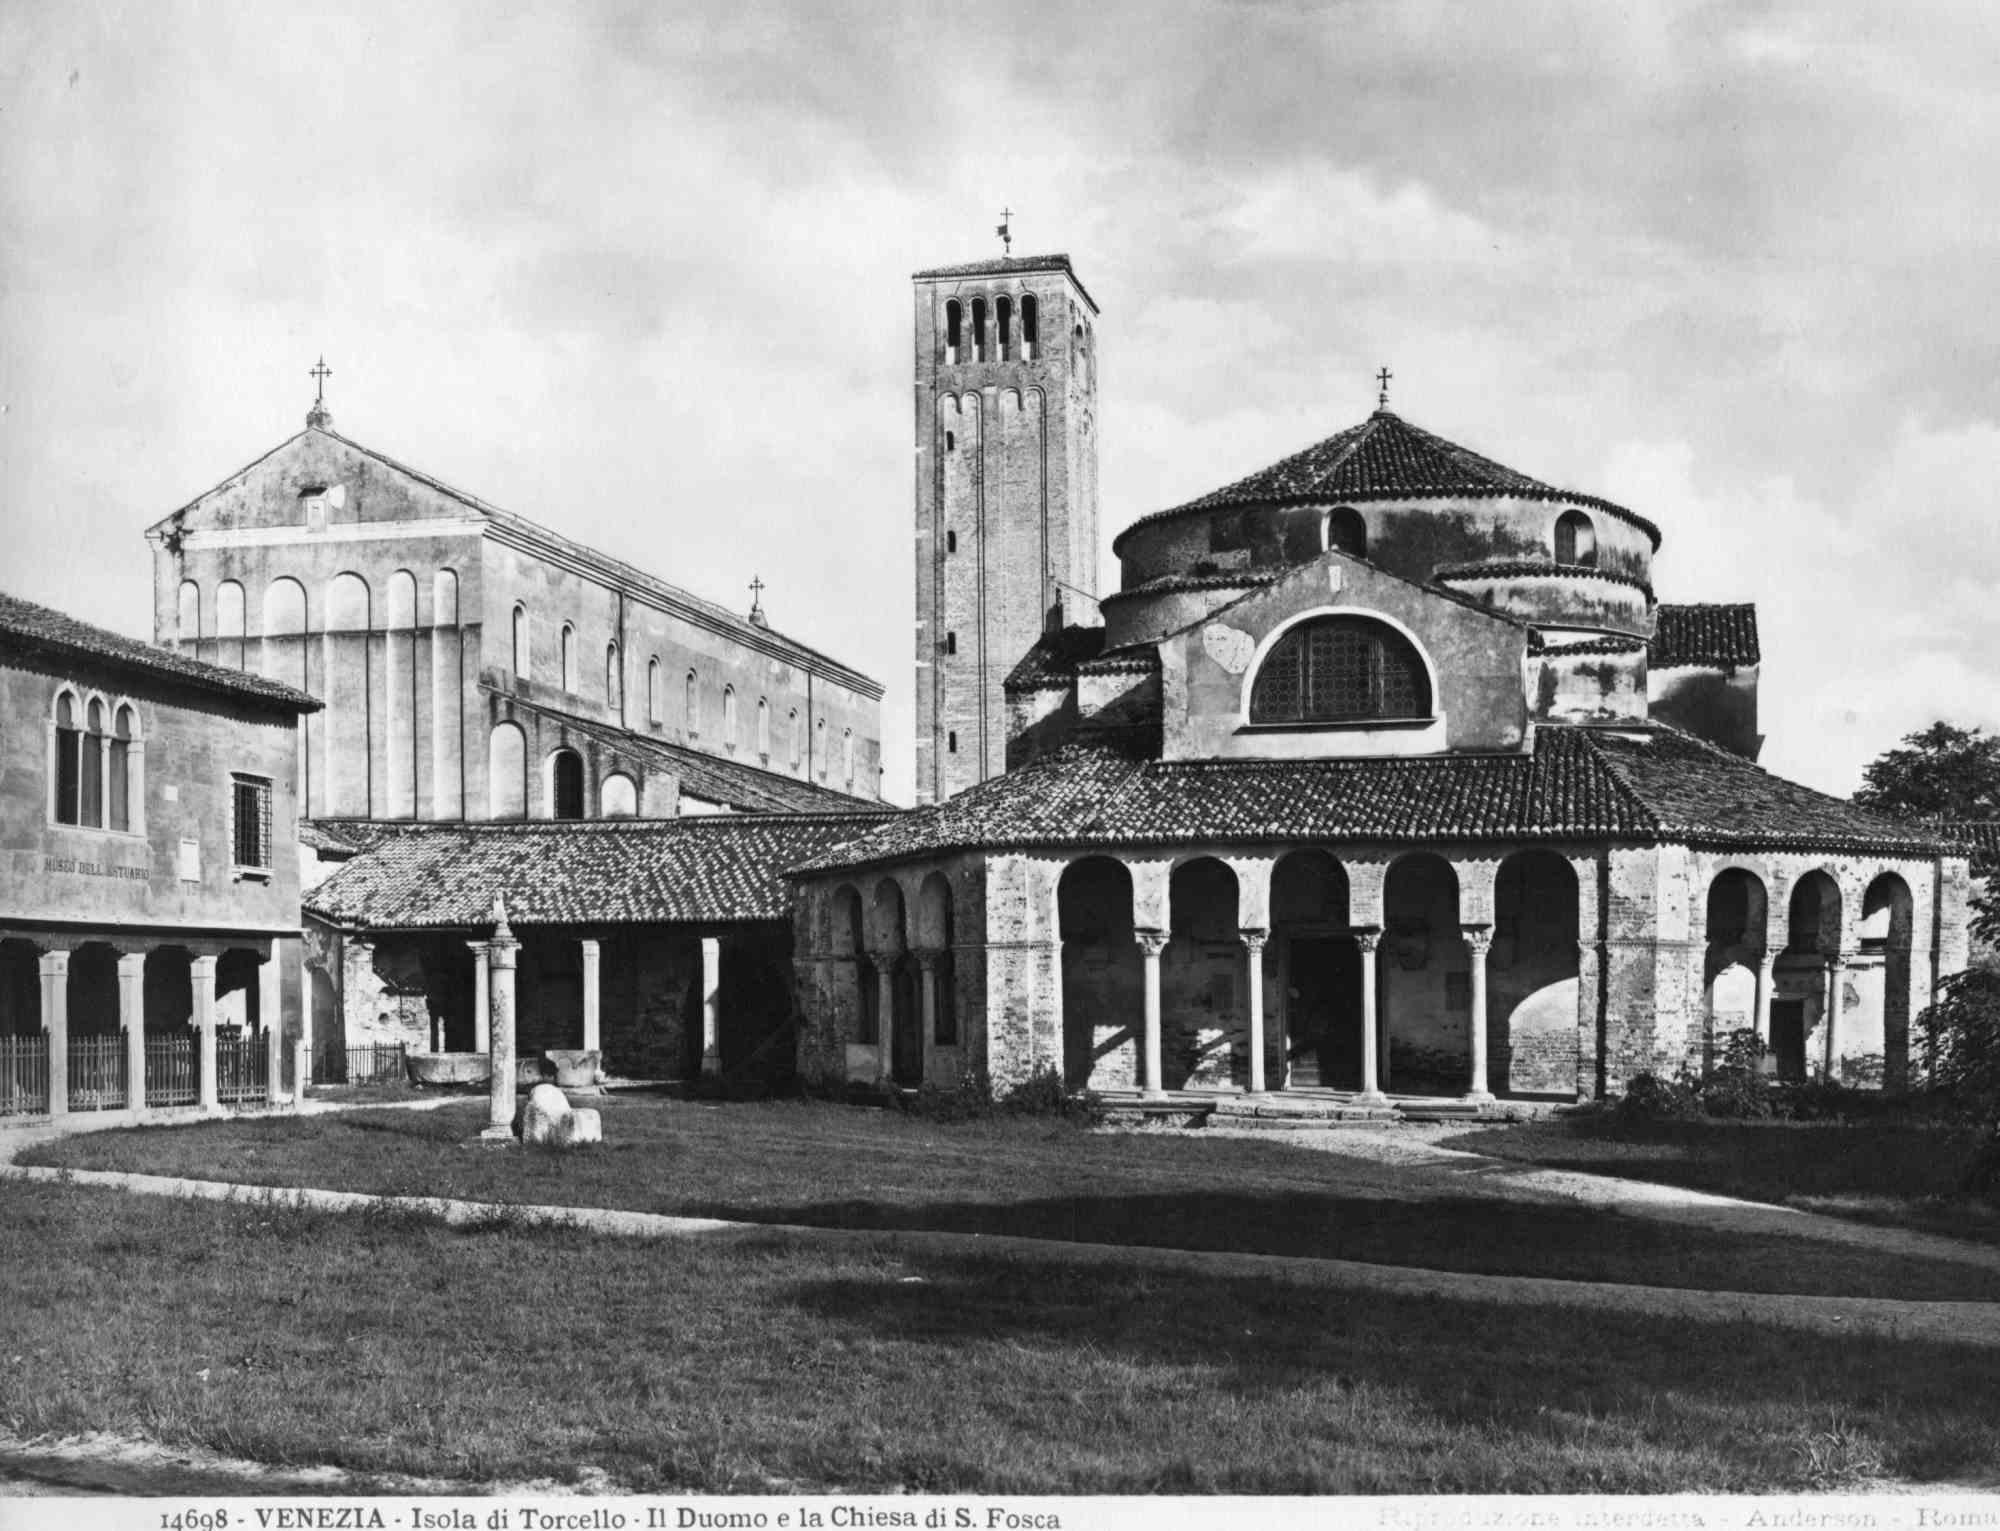 S.Foscs’s Cathedral of Torcello - Original Photograph - Early 20th Century